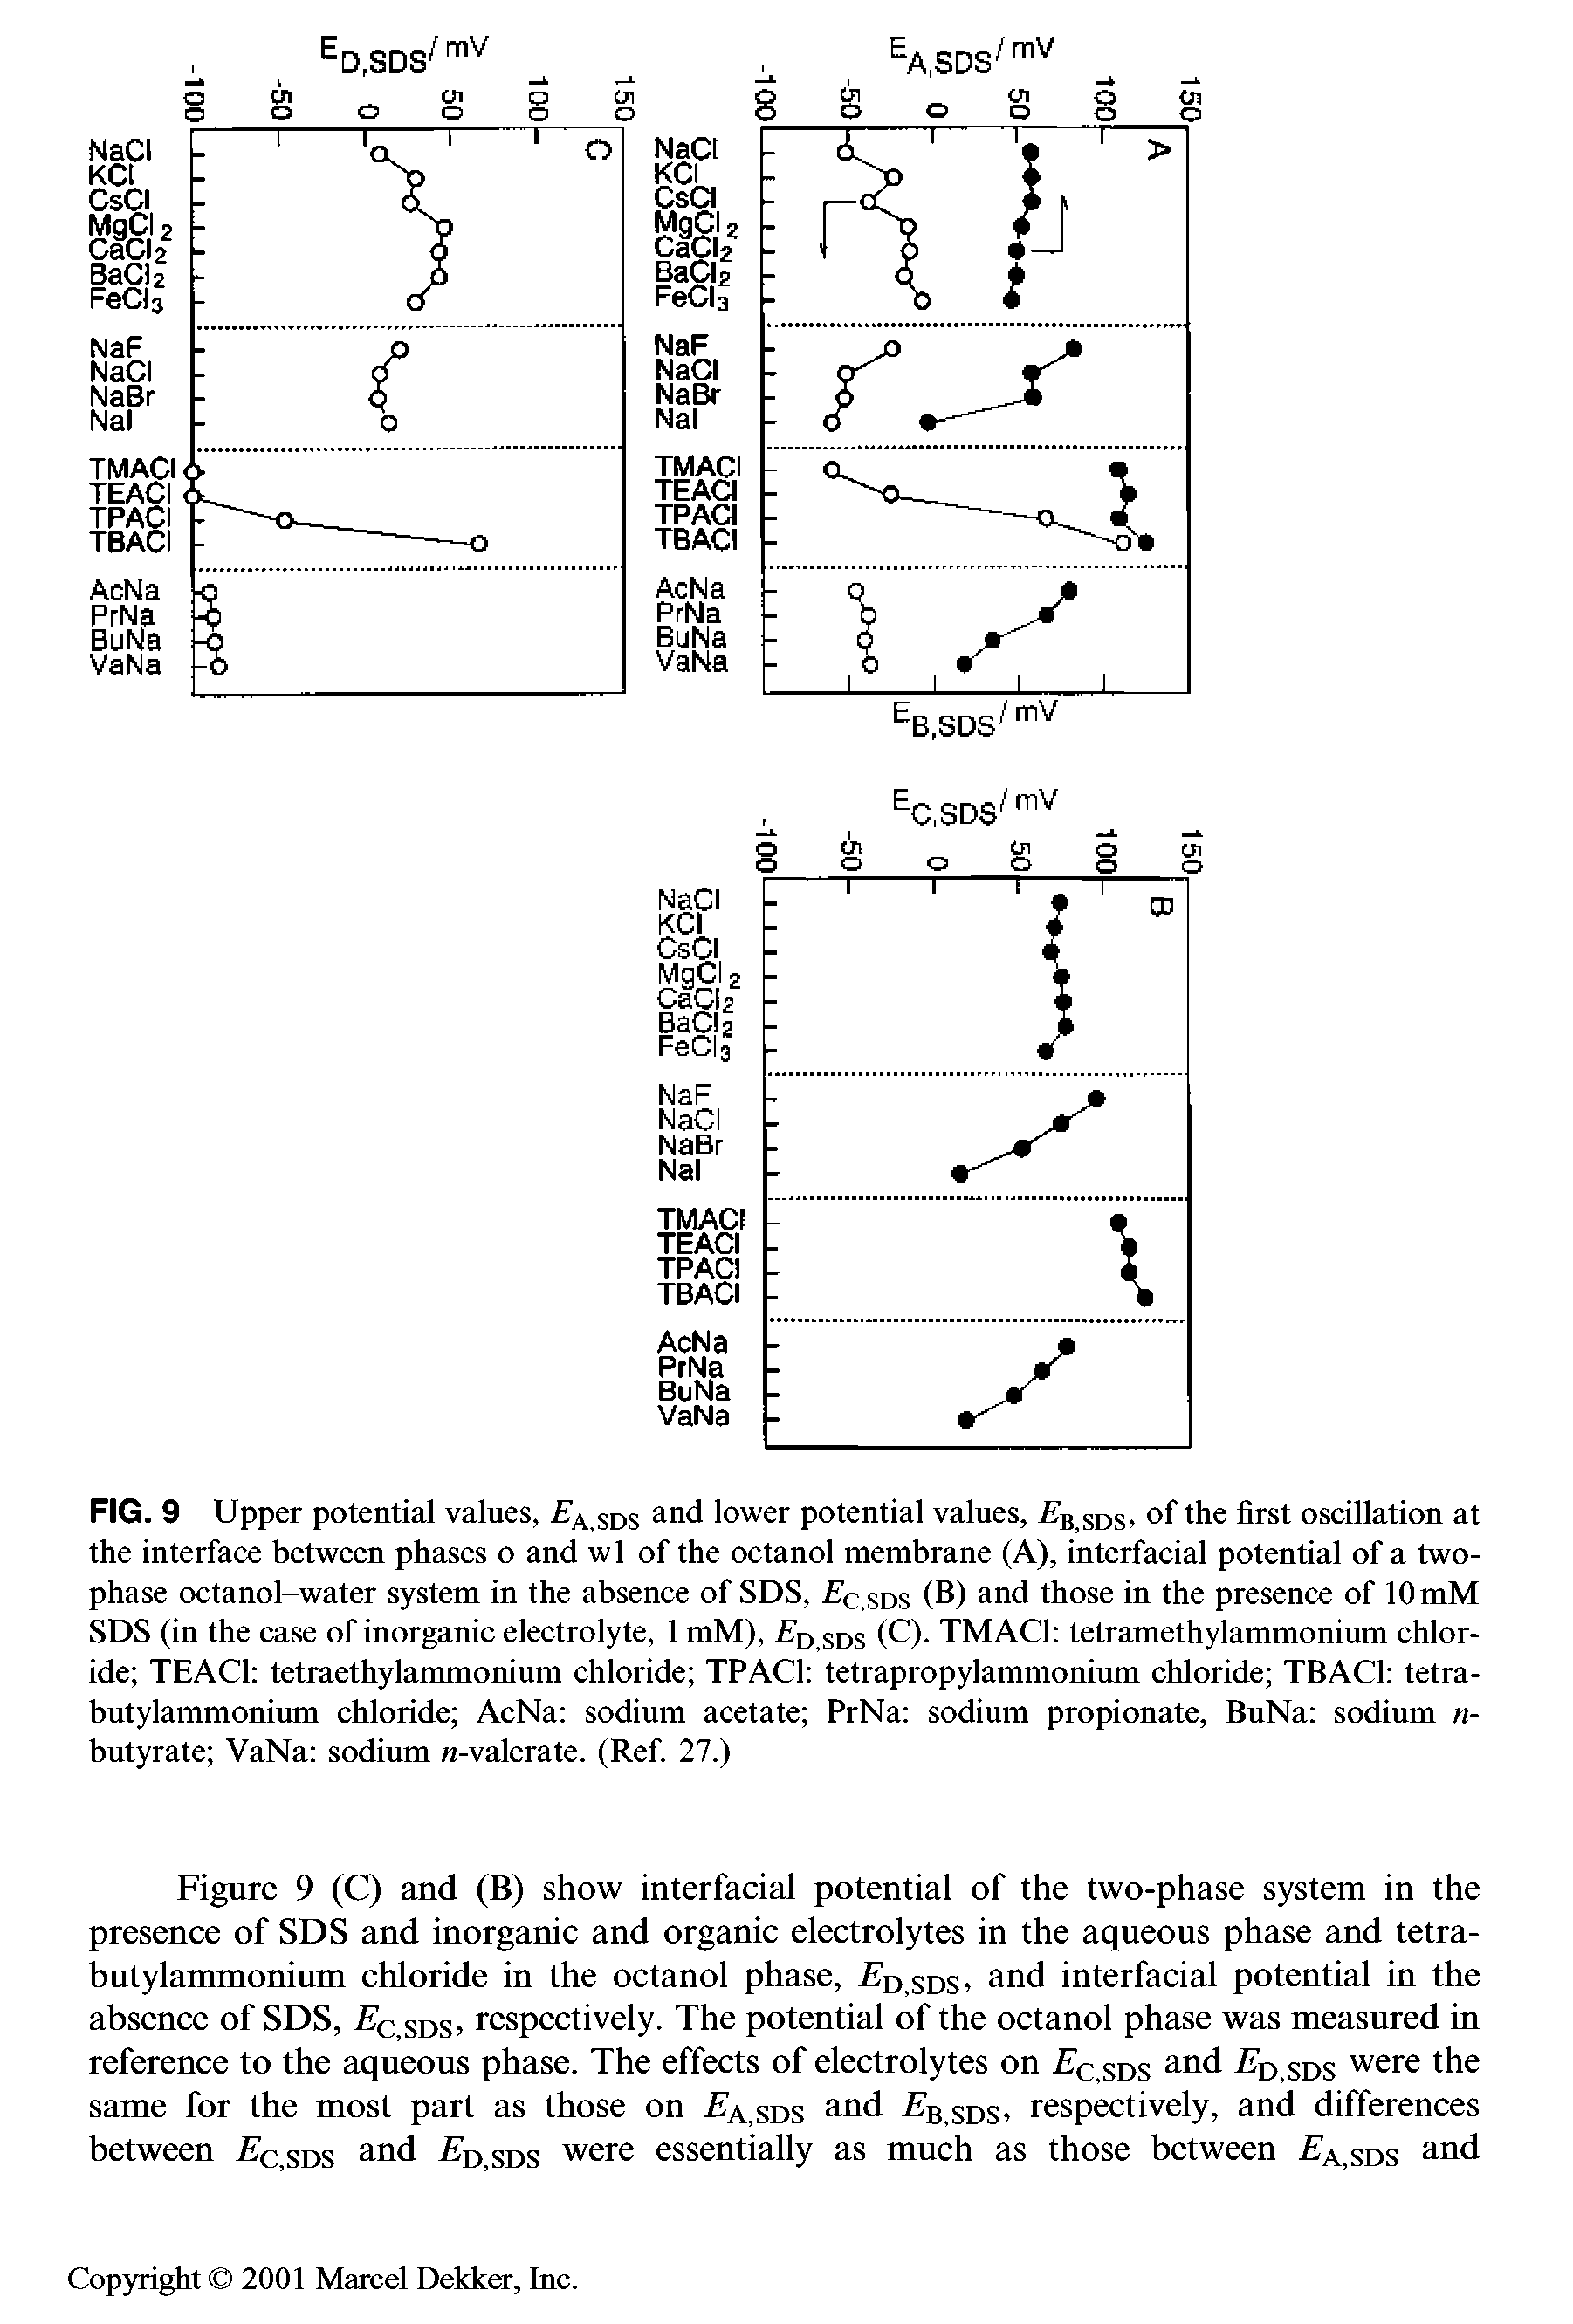 Figure 9 (C) and (B) show interfacial potential of the two-phase system in the presence of SDS and inorganic and organic electrolytes in the aqueous phase and tetra-butylammonium chloride in the octanol phase, iiD,sDS> and interfacial potential in the absence of SDS, iJc.sDS respectively. The potential of the octanol phase was measured in reference to the aqueous phase. The effects of electrolytes on c,sds and i D,sDS were the same for the most part as those on a,sds and iJs.sDS respectively, and differences between Eqsds and Tsdsds were essentially as much as those between a,sds and...